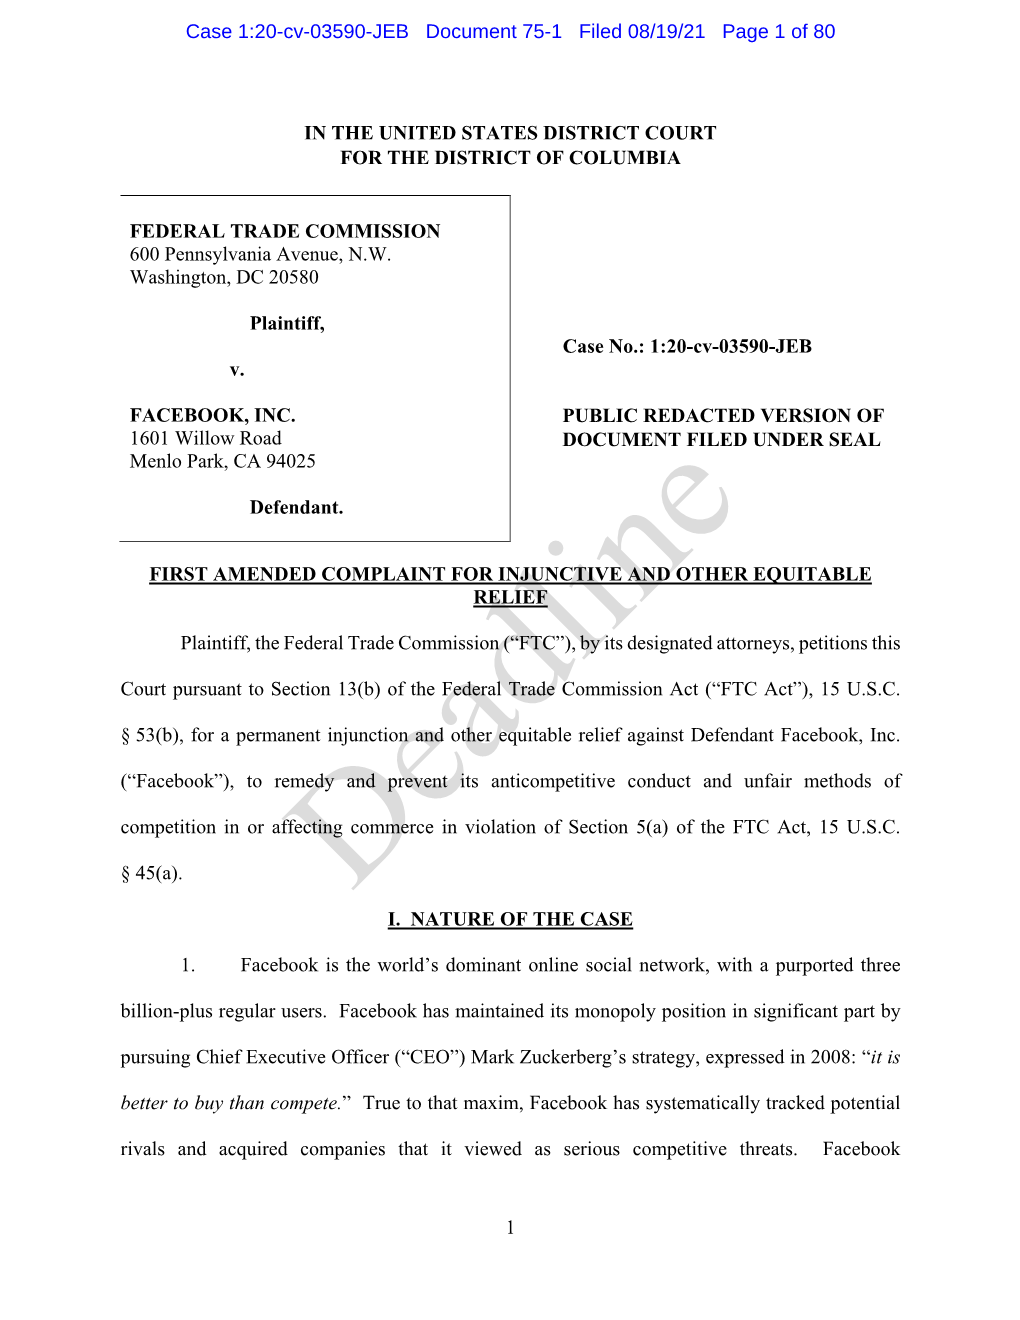 First Amended Complaint for Injunctive and Other Equitable Relief